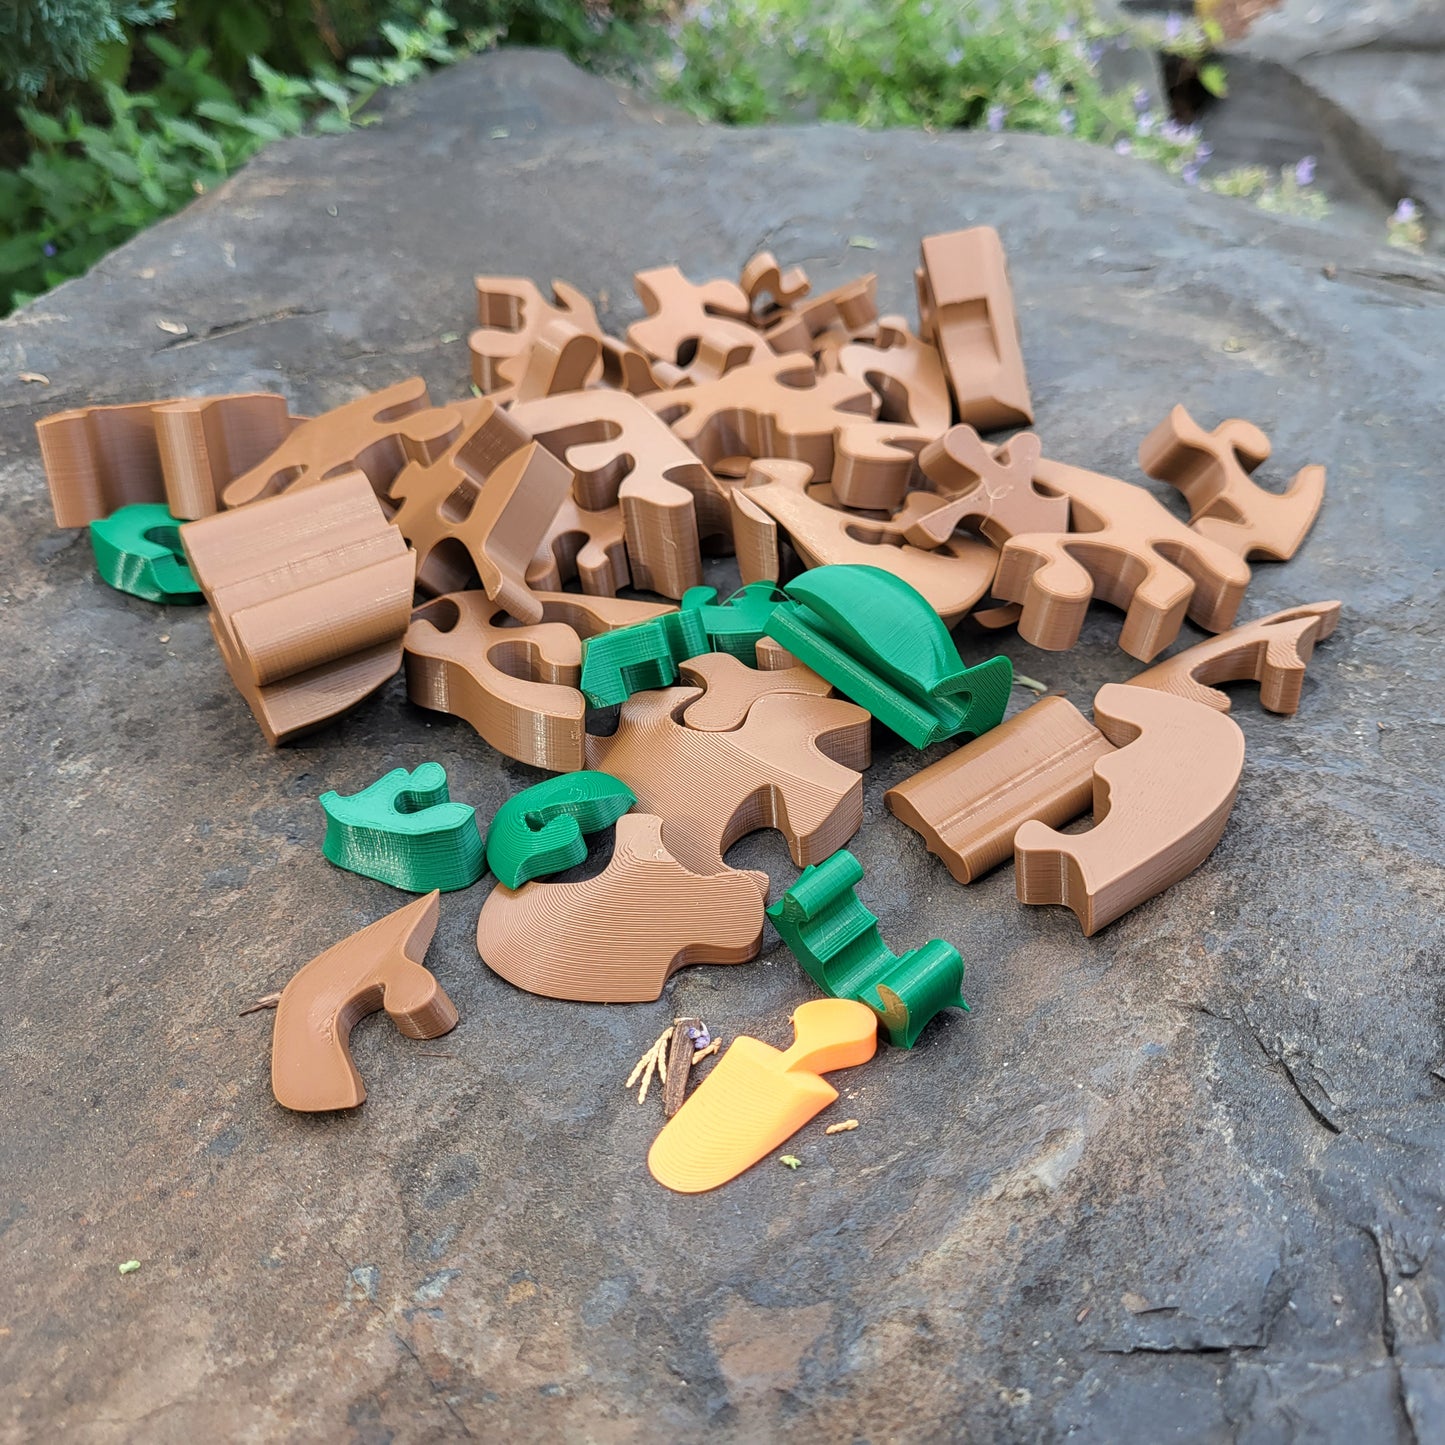 The Duck Puzzle